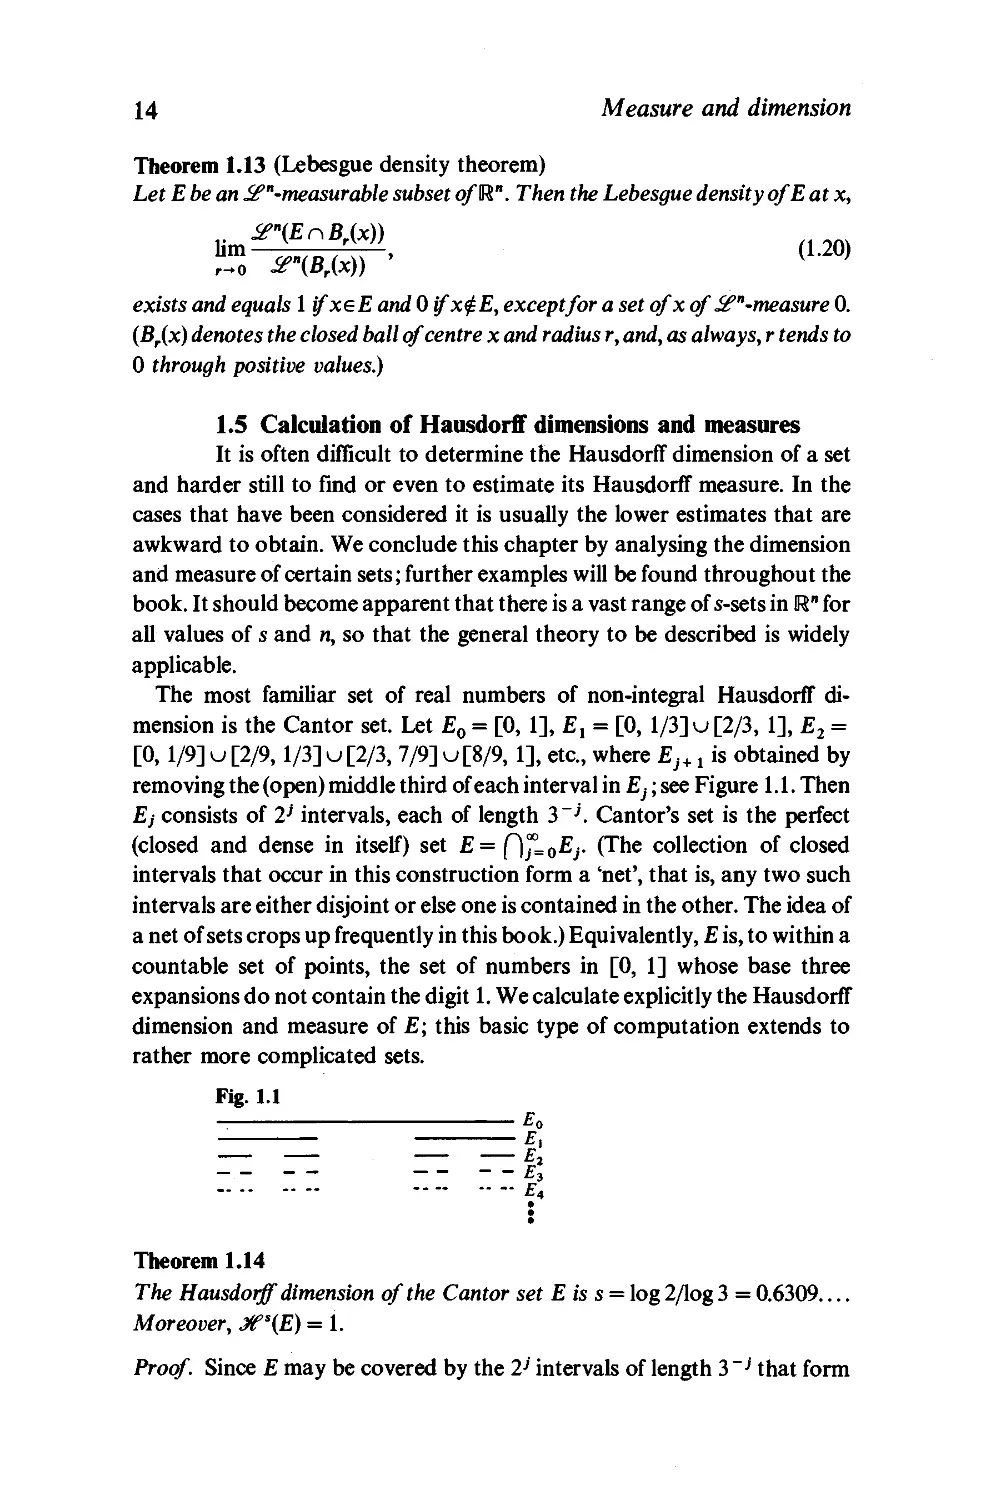 1.5 Calculation of Hausdorff dimensions and measures